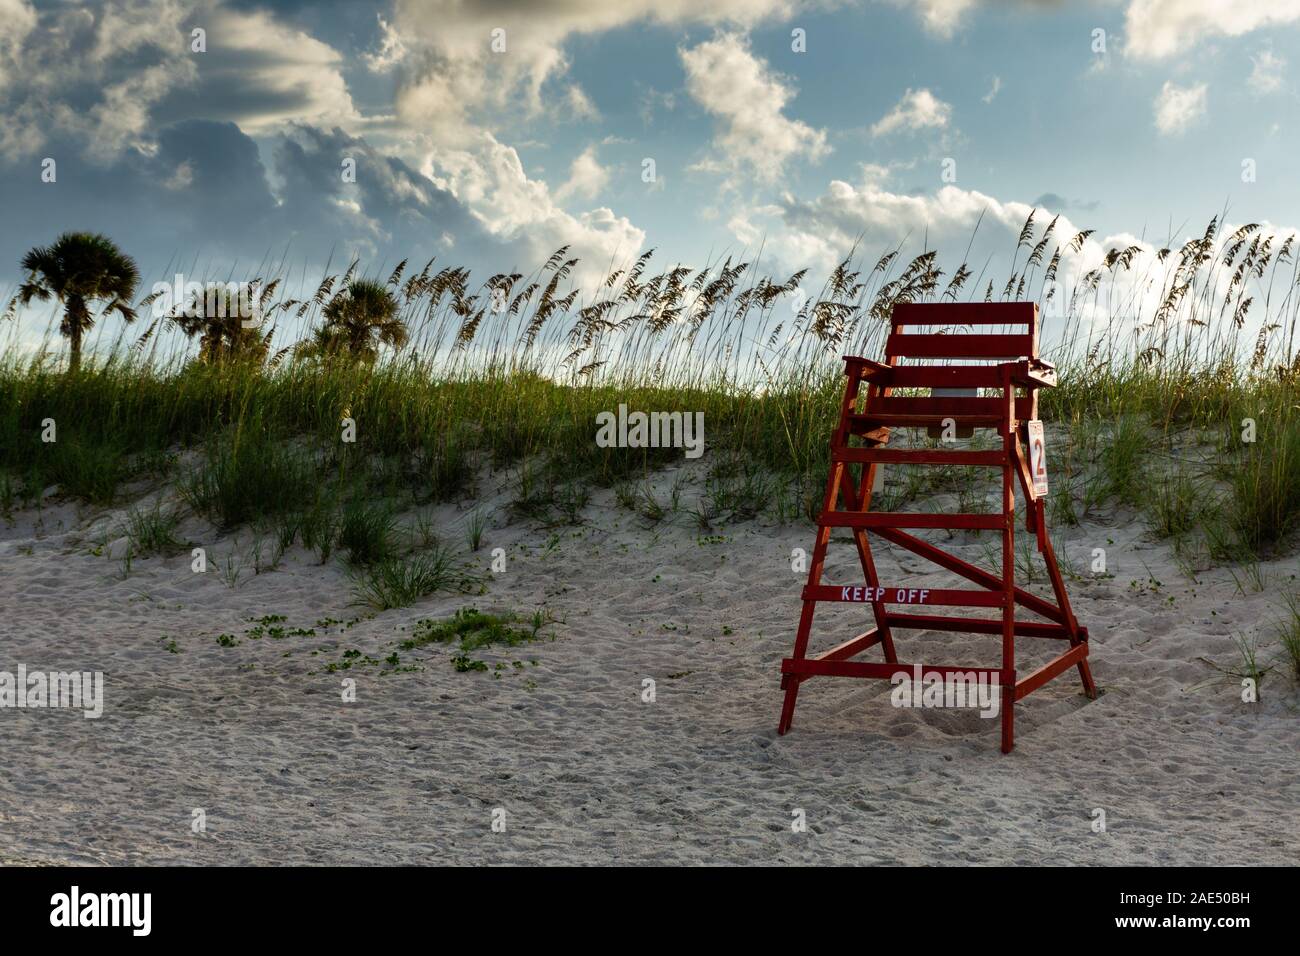 Life guard chair on the beach with sea oats and blue skies. Stock Photo